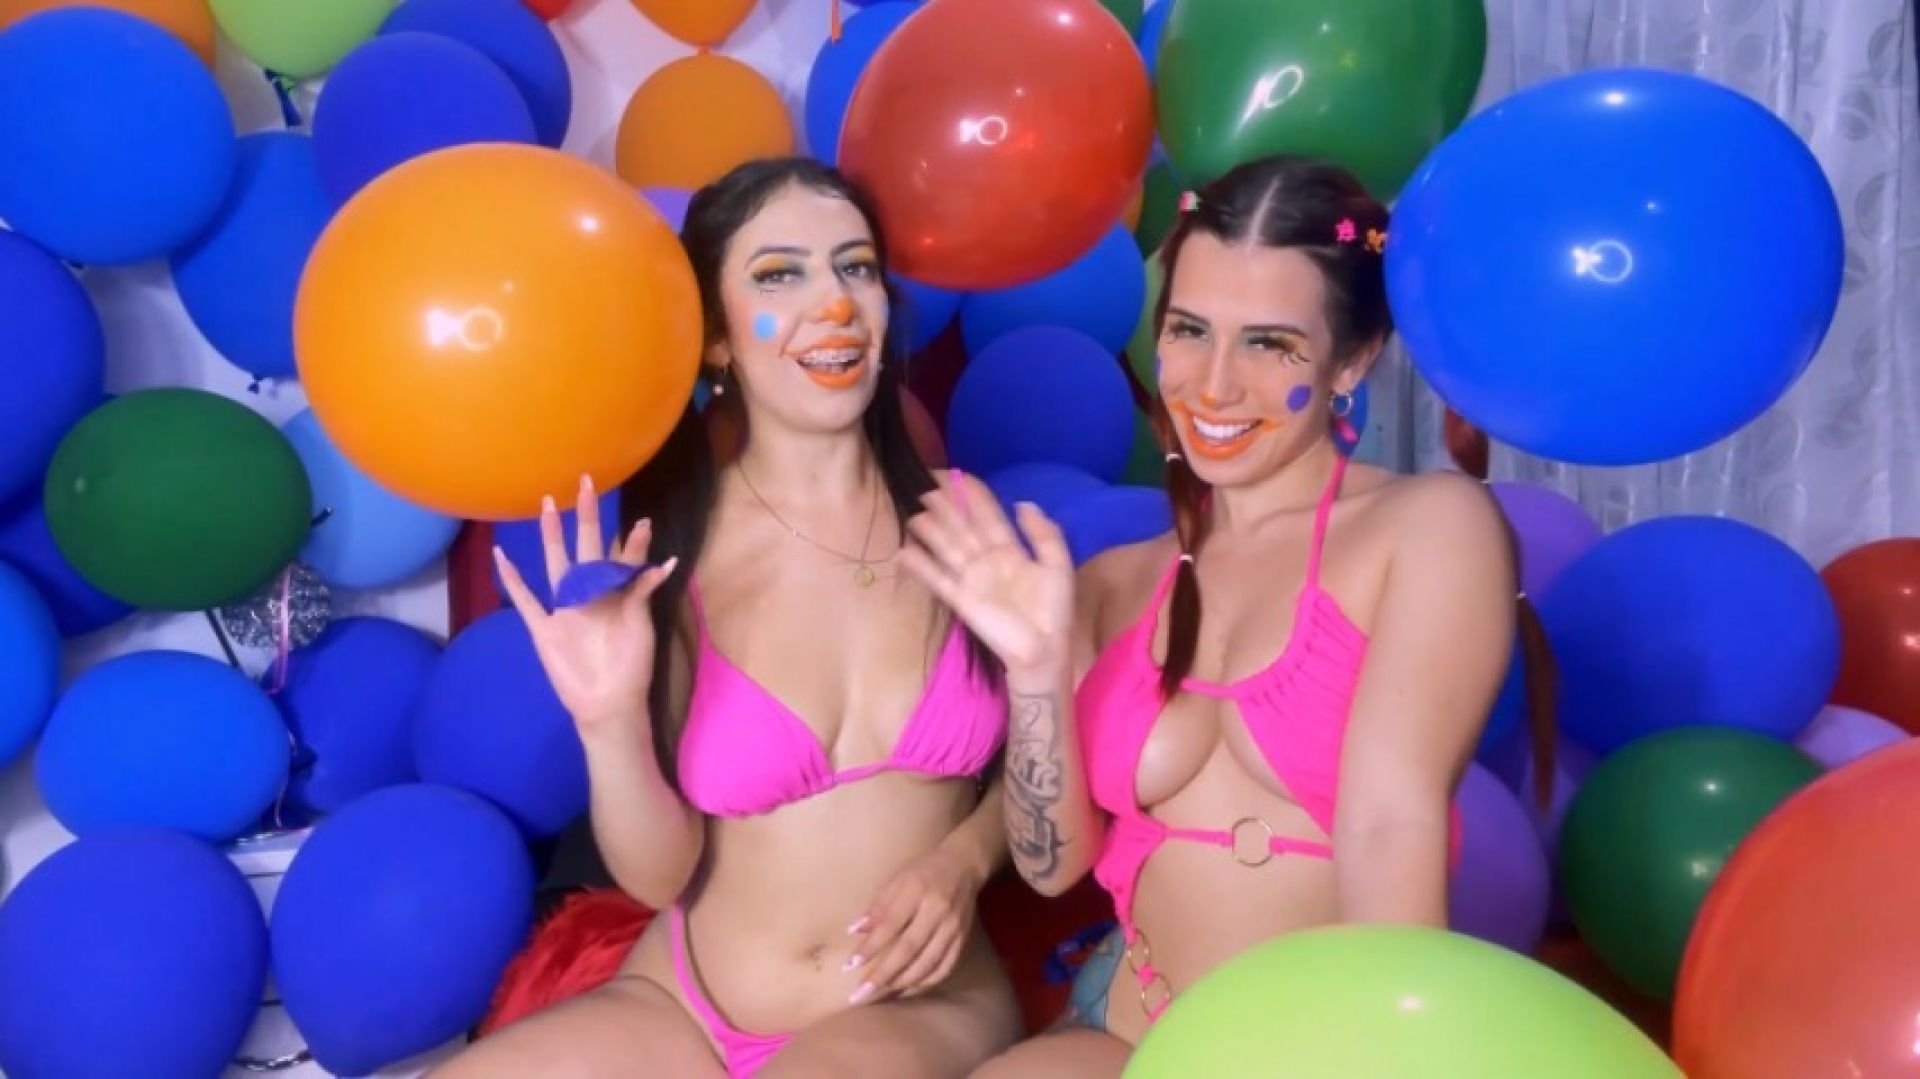 Two cute clowns inflating balloons